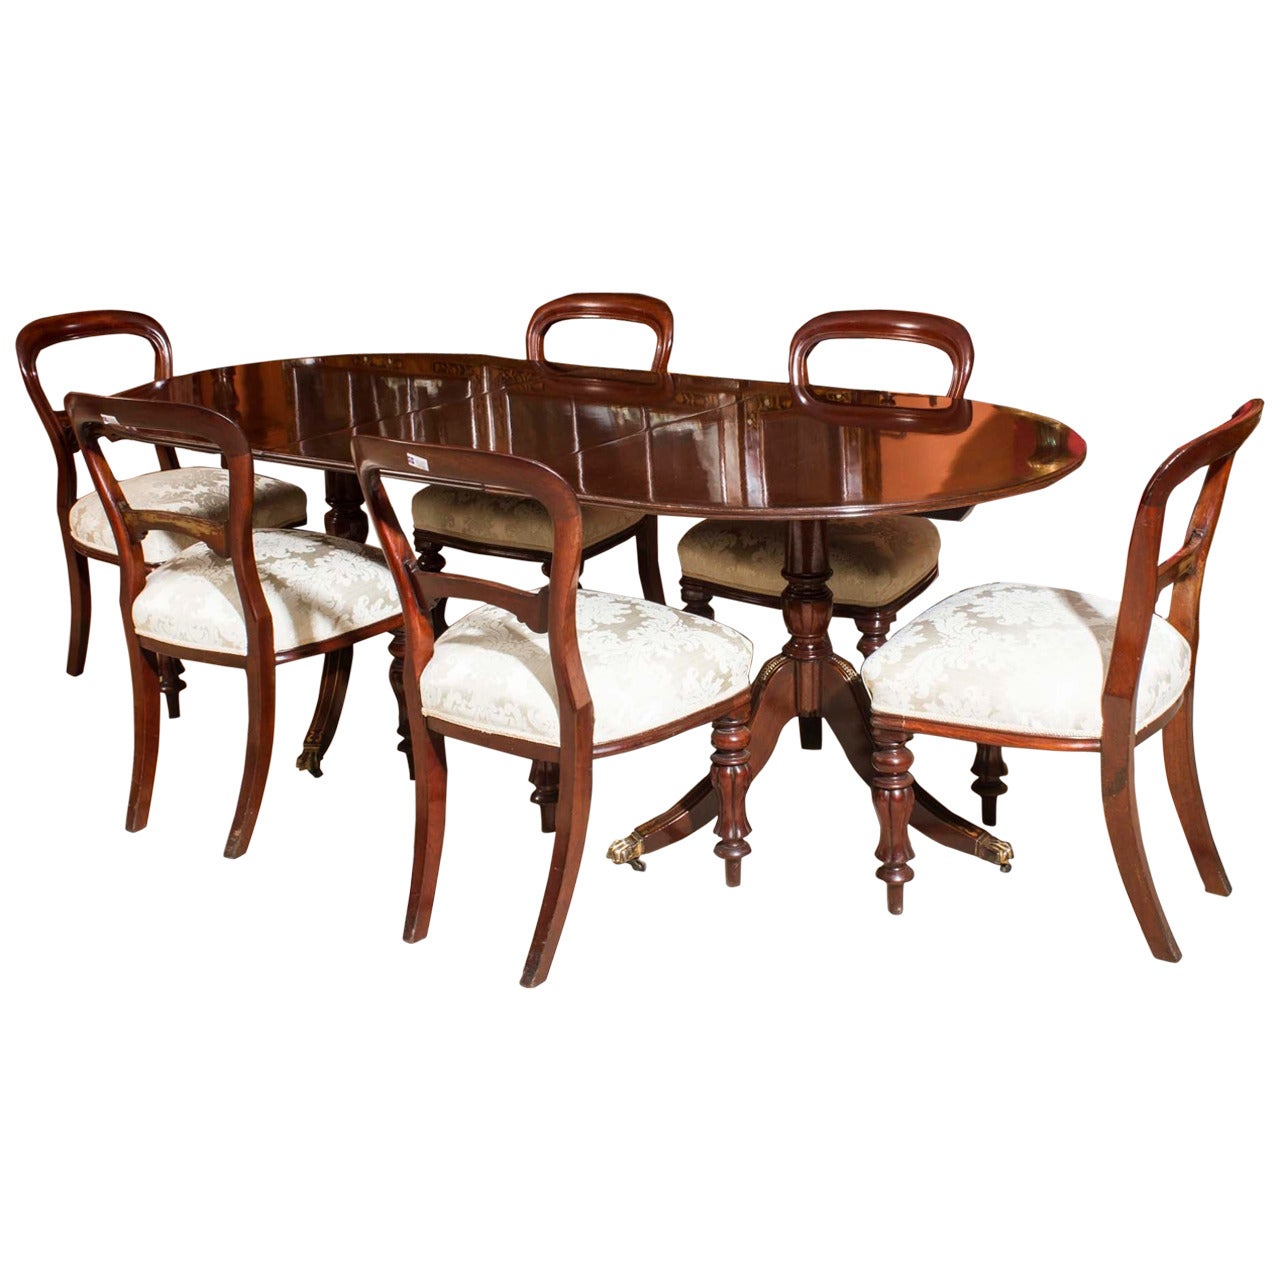 Vintage Regency Style Dining Table and Six Antique Chairs